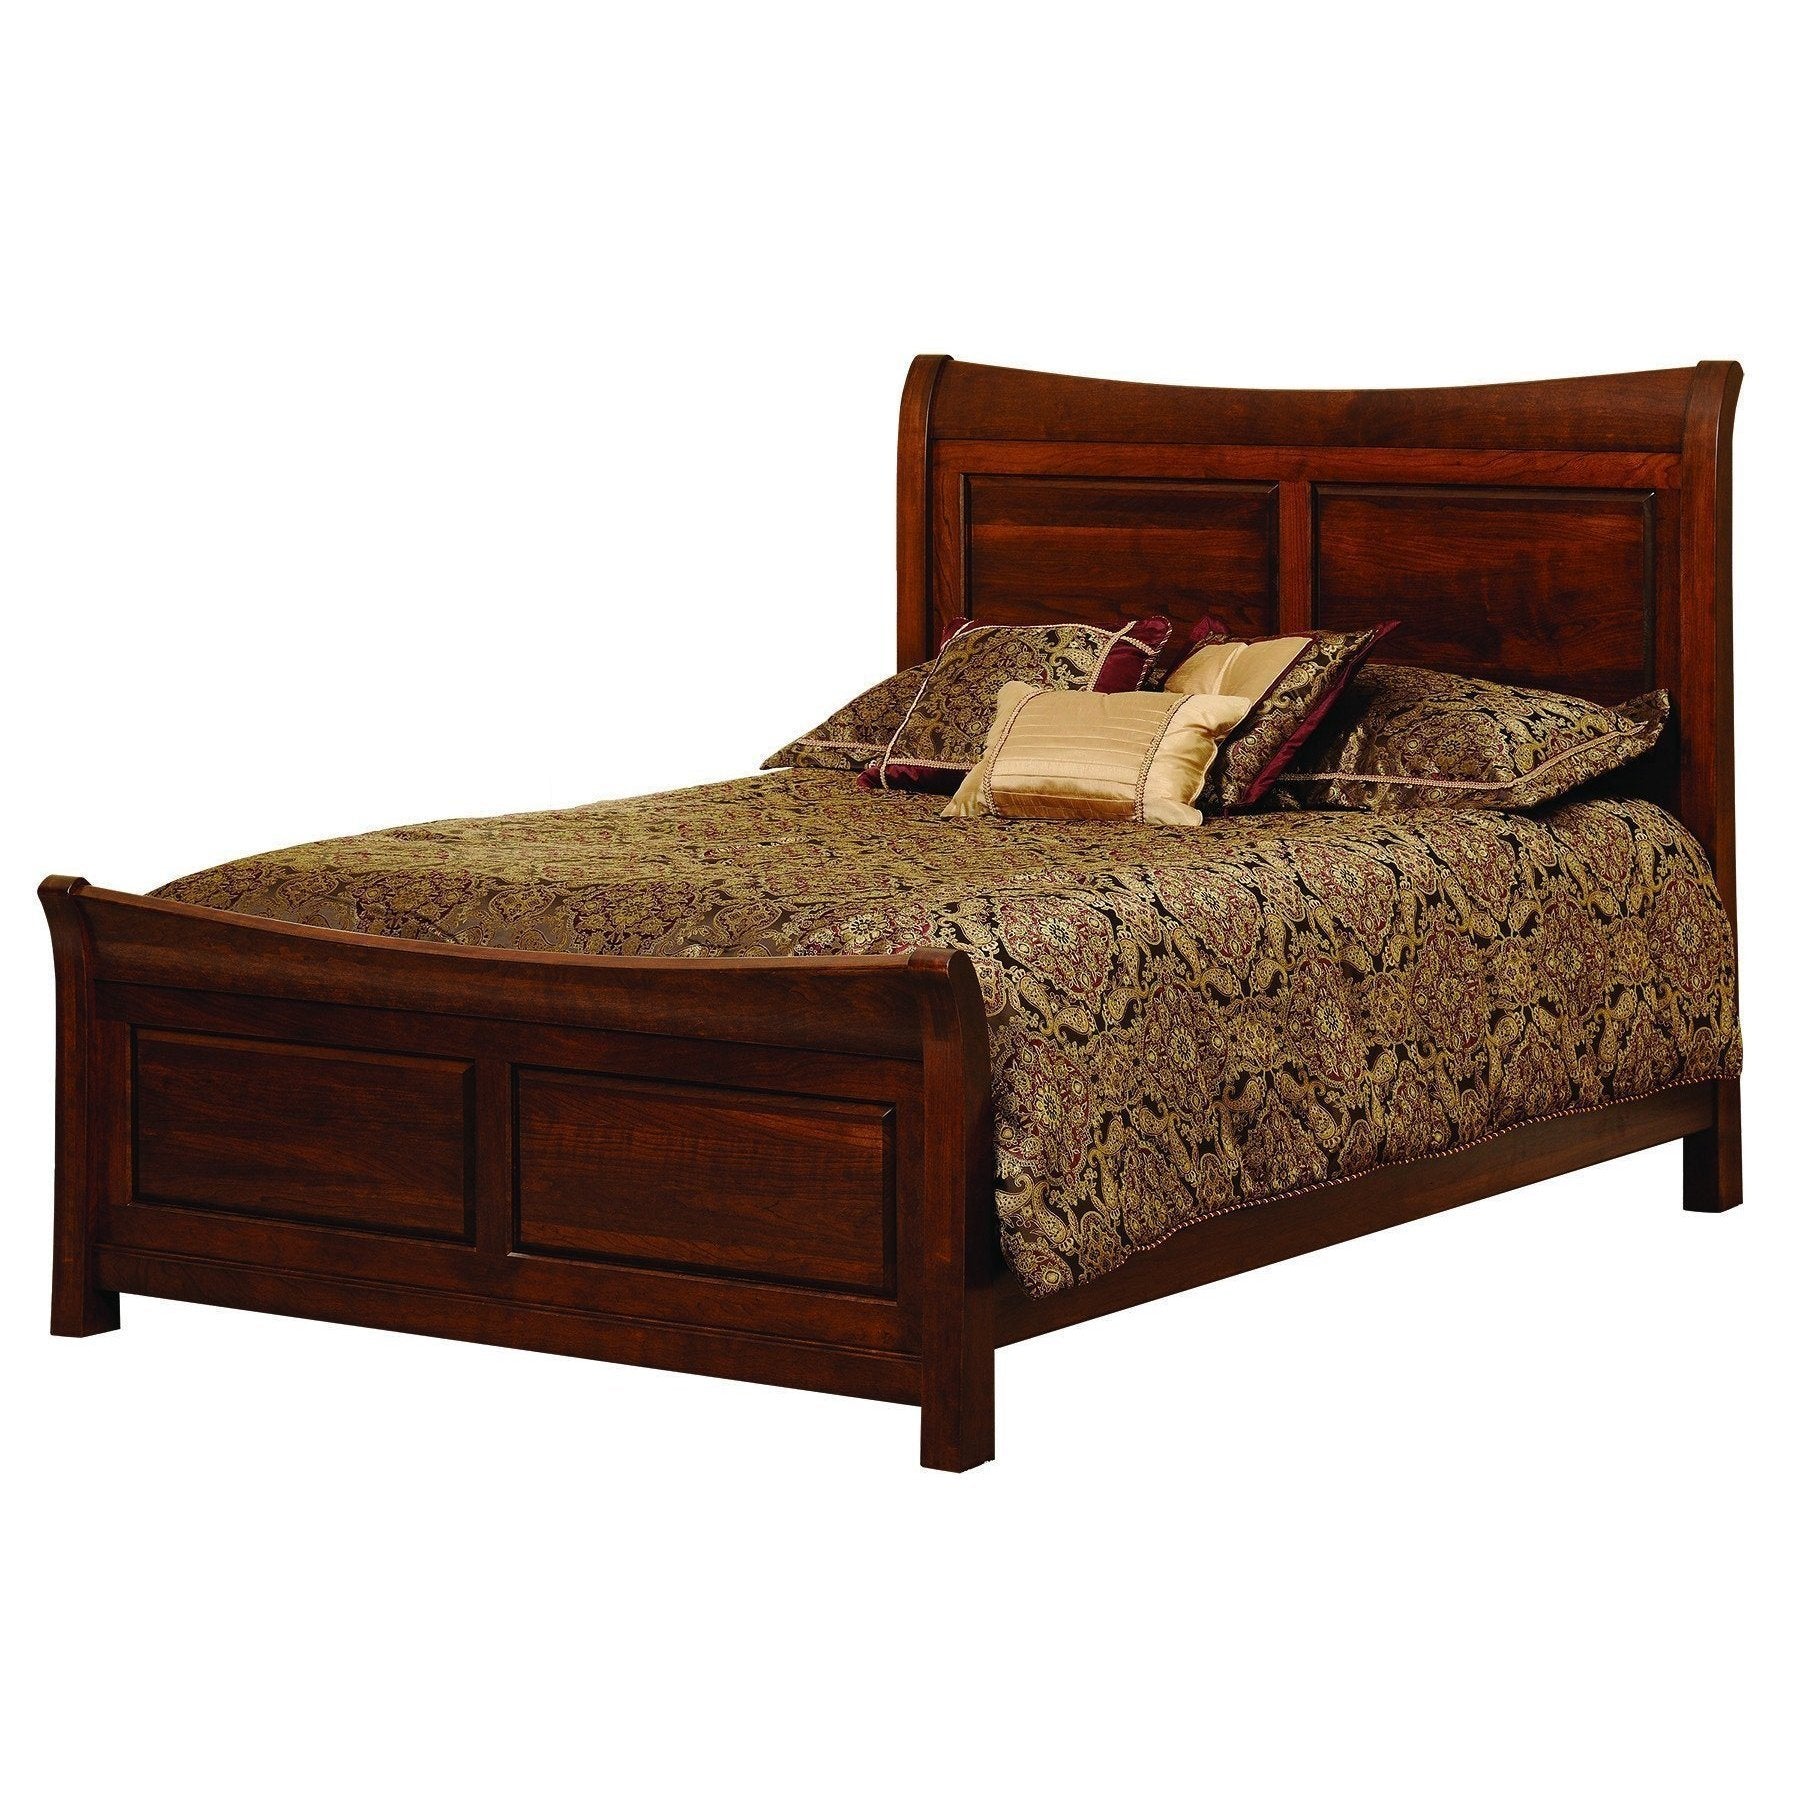 Wilkshire Bevel Panel Bed-Bedroom-The Amish House